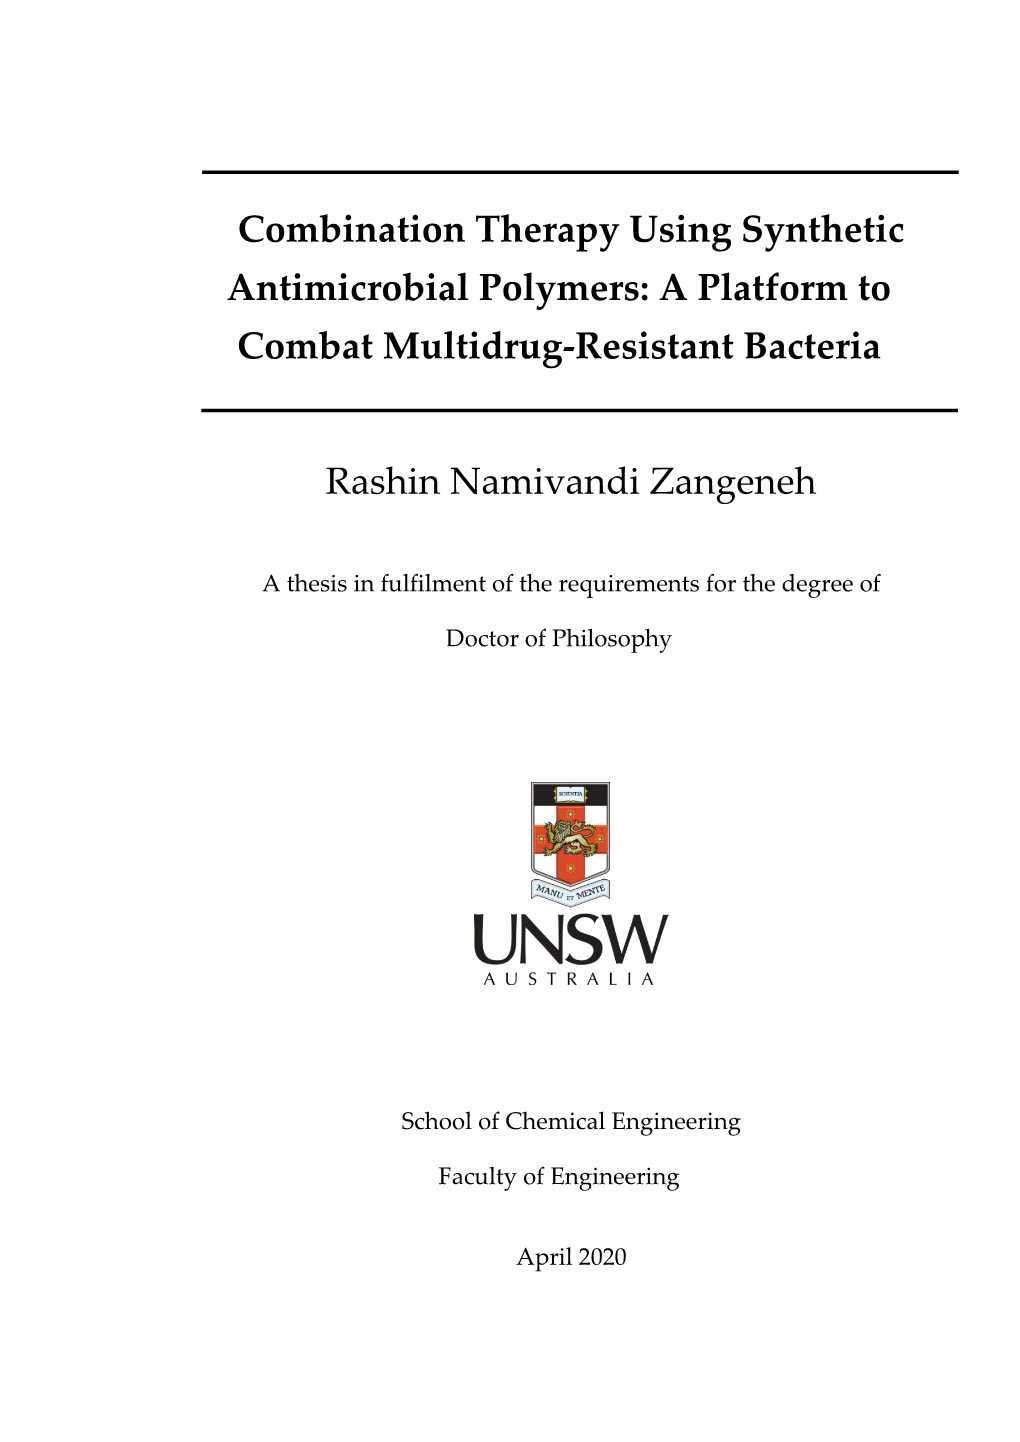 Combination Therapy Using Synthetic Antimicrobial Polymers: a Platform to Combat Multidrug-Resistant Bacteria Rashin Namivandi Z